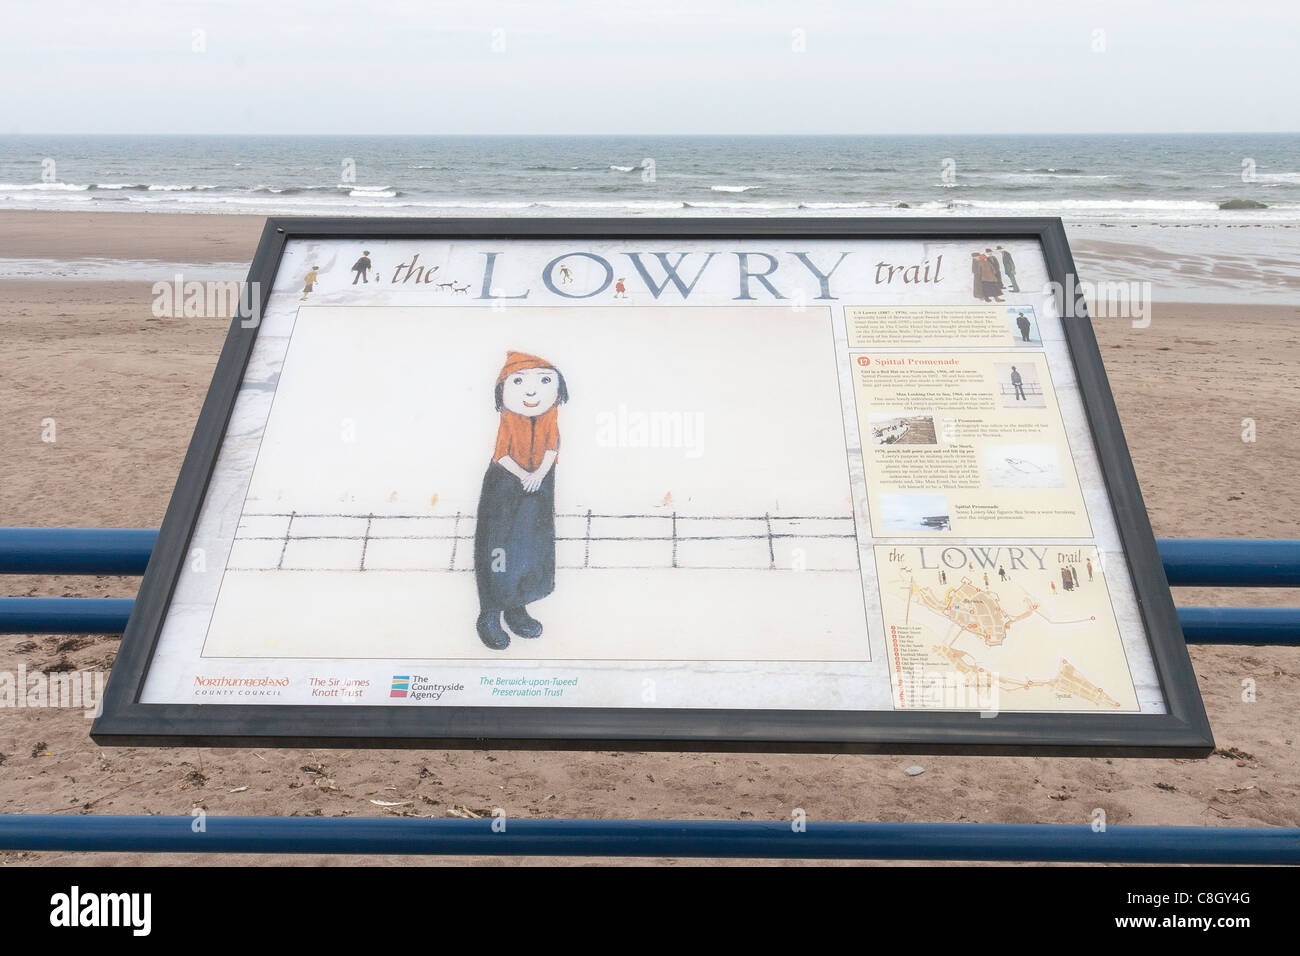 Lowry's Berwick upon Tweed - a picture at Spittal promenade Stock Photo